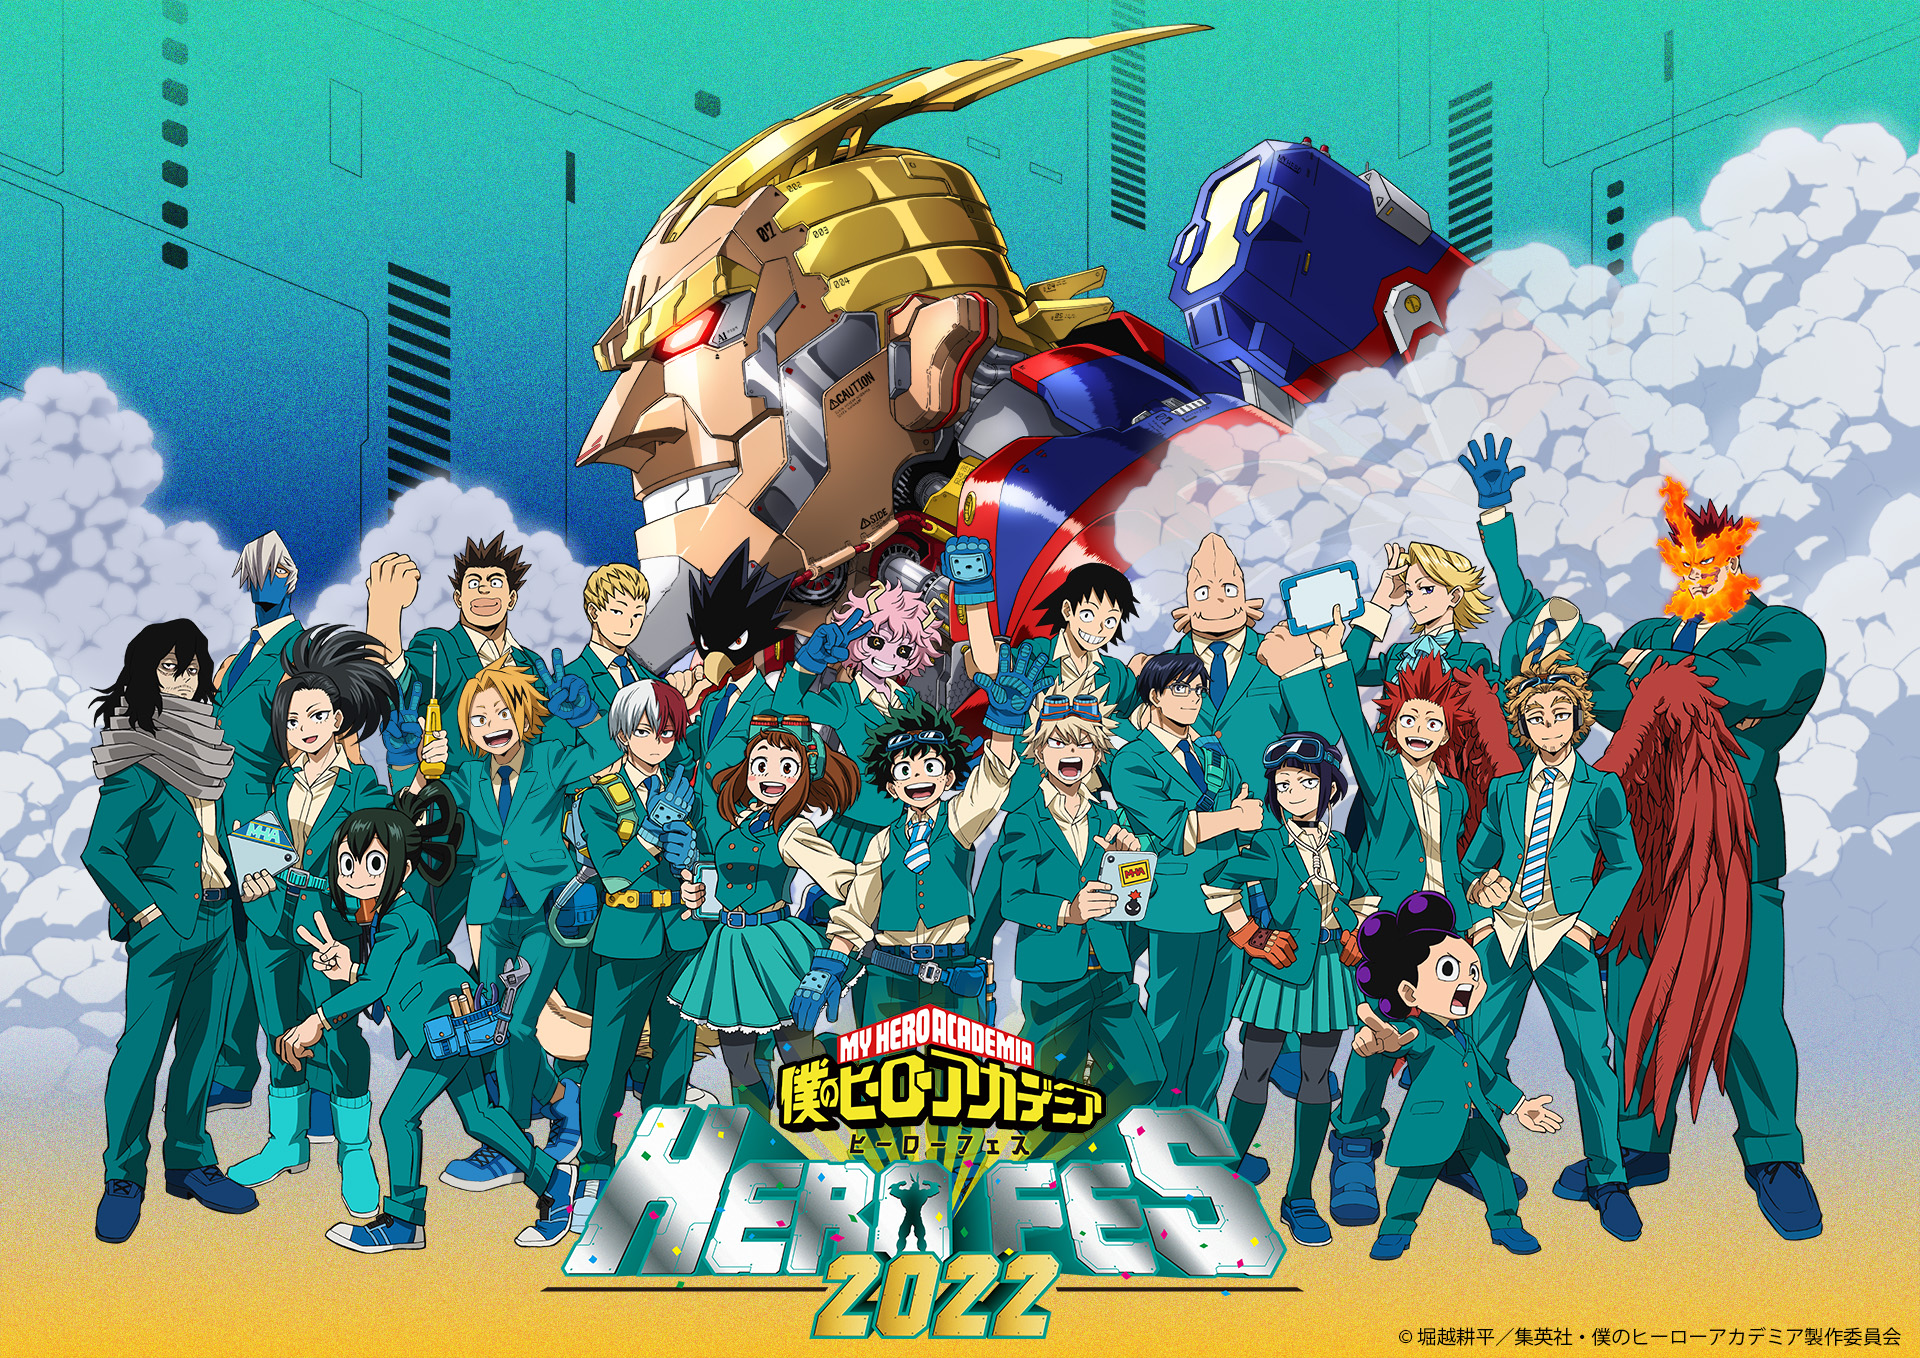 My Hero Academia Gets Special Hawks OVA with Movie's Home Video Release